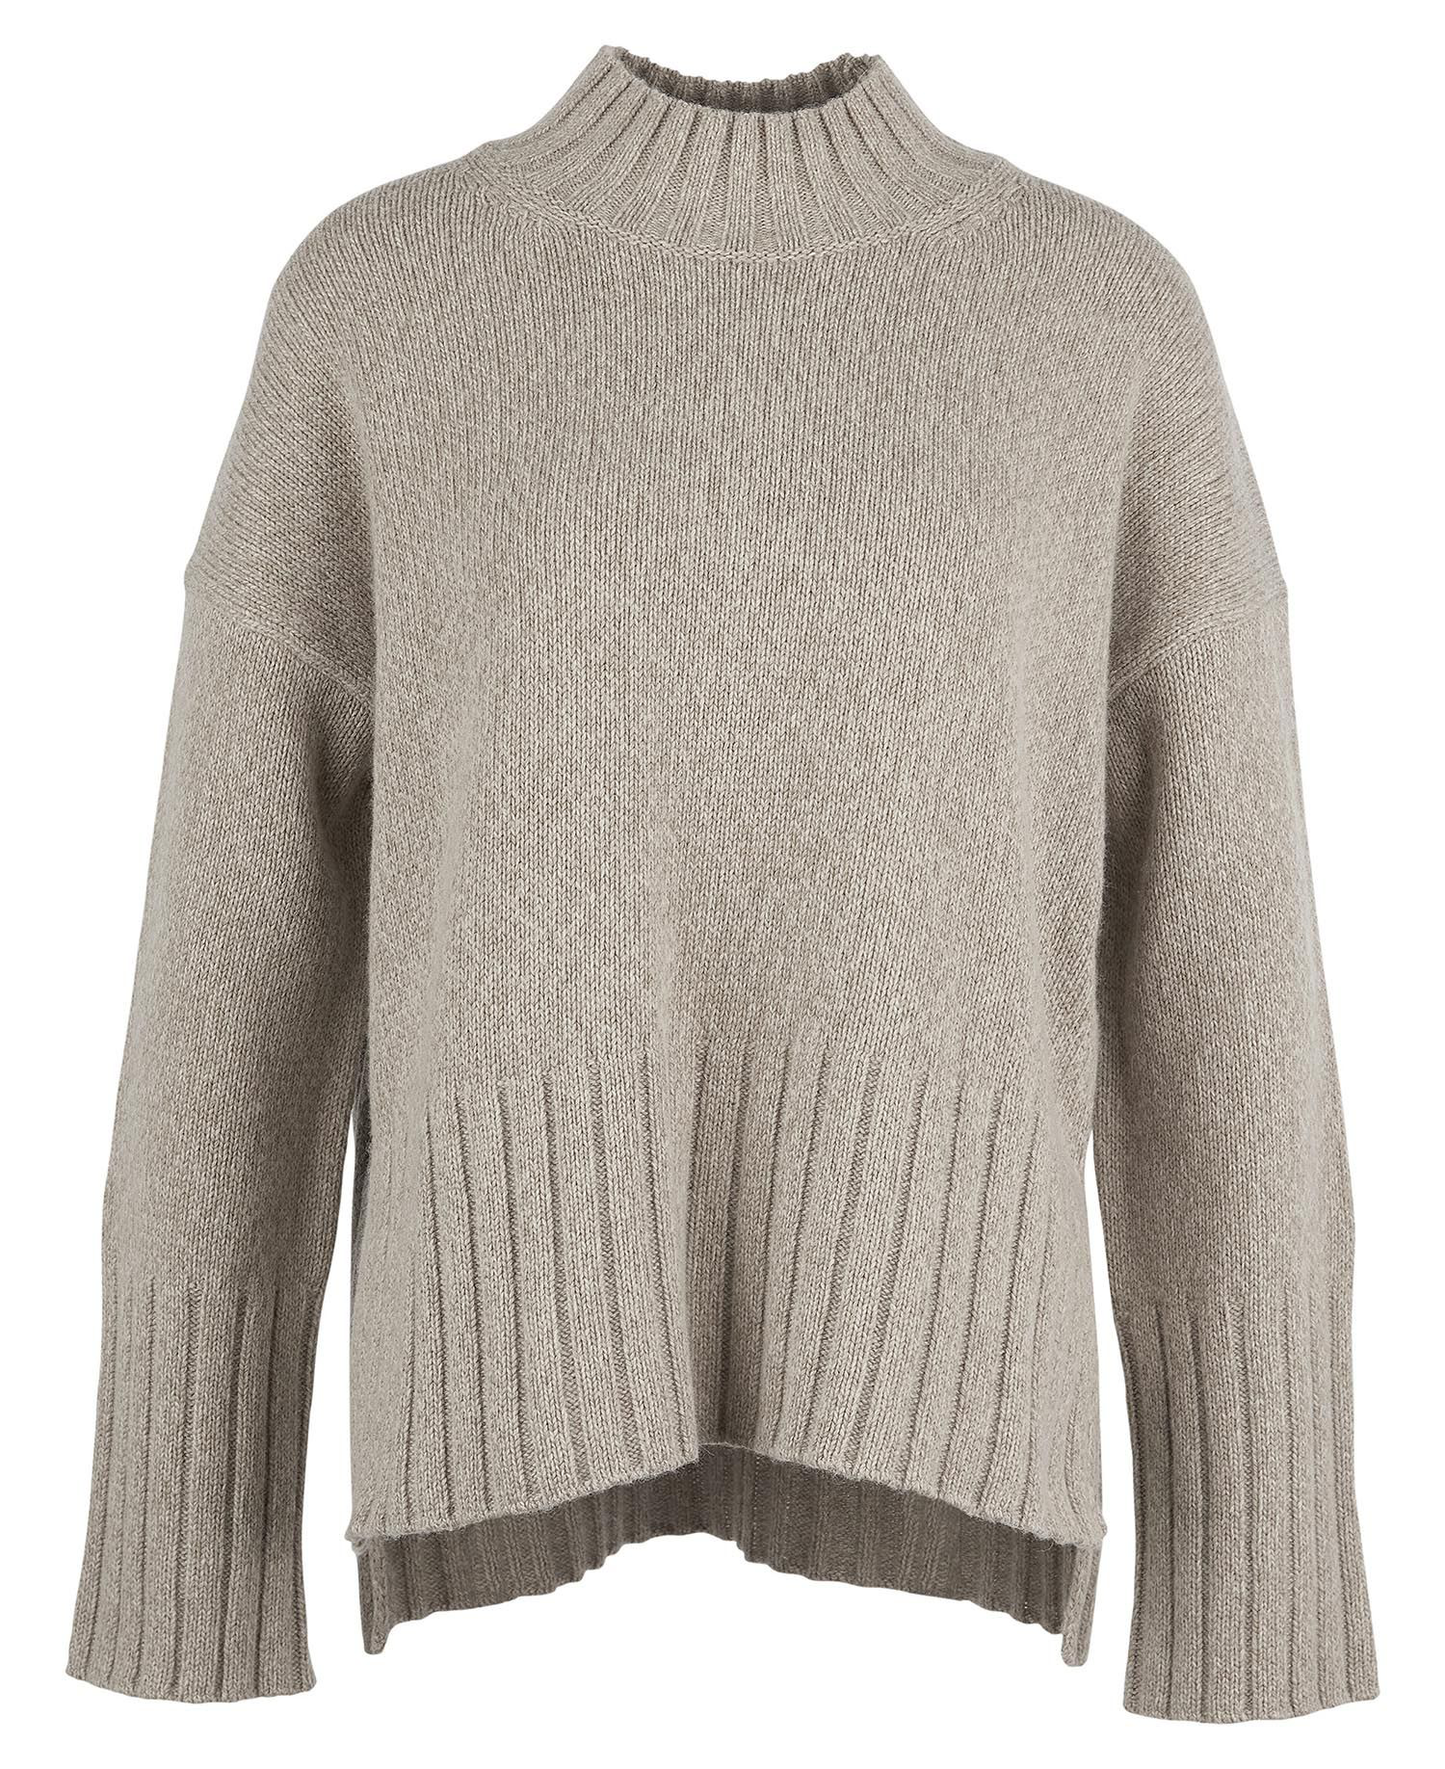 Winona Knitted Jumper - Rivers & Glen Trading Co.